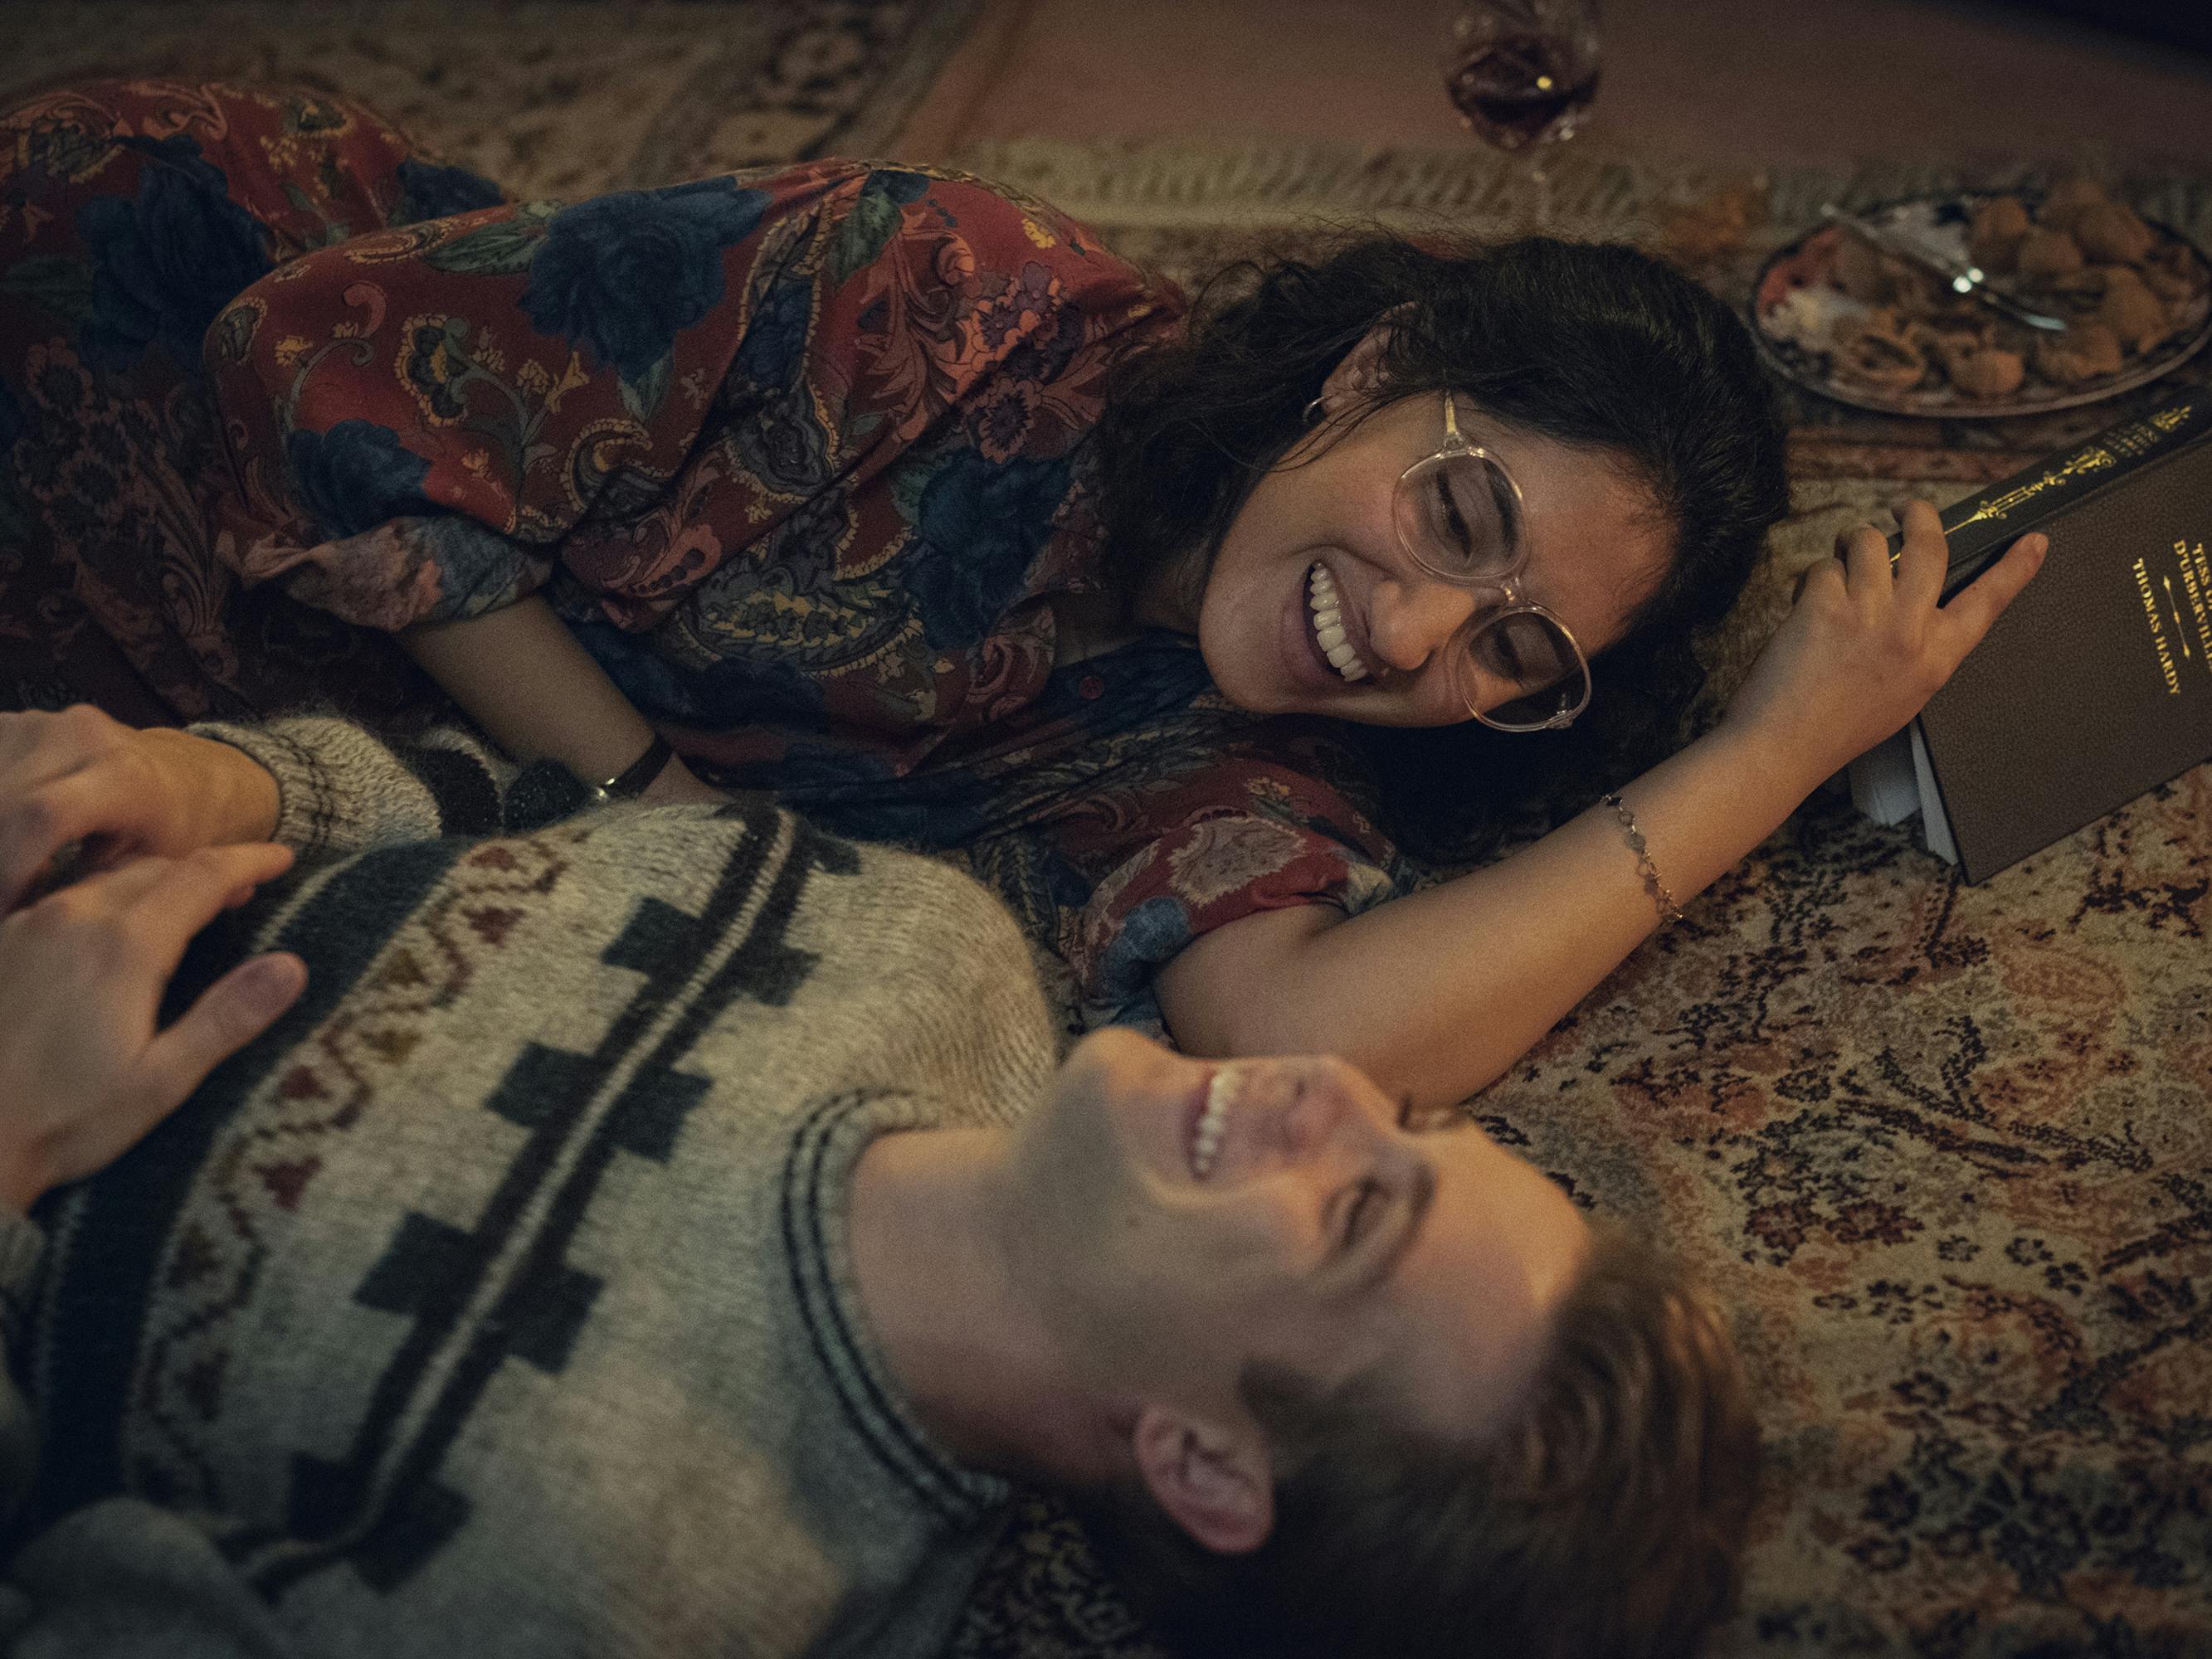 Dexter Mayhew (Leo Woodall) and Emma Morley (Ambika Mod) lie on a rug laughing. 